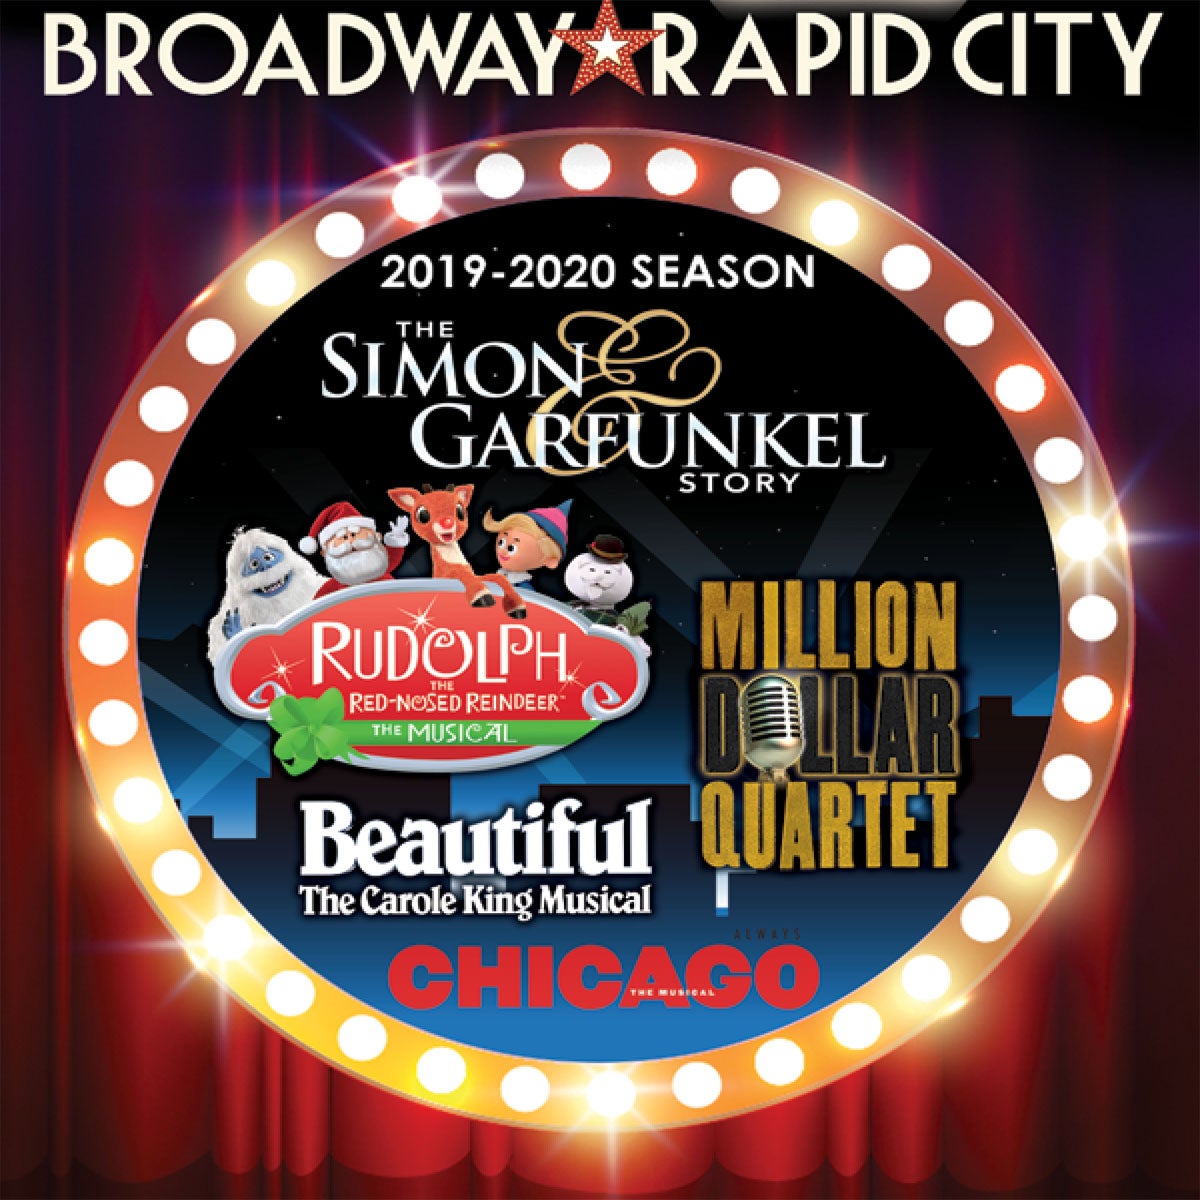 More Info for Announcing the 2019-2020 Broadway Rapid City Series